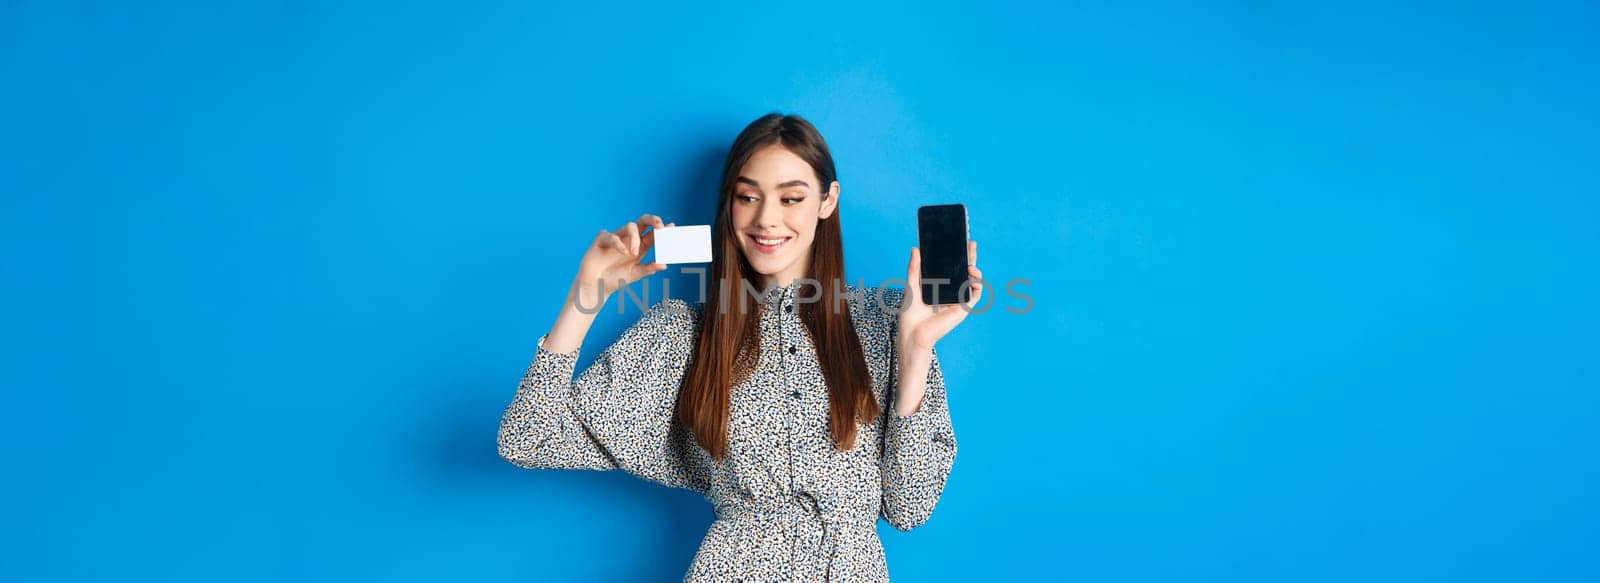 Online shopping. Beautiful female model showing empty cellphone screen and plastic credit card, smiling pleased, buying in internet store, blue background.